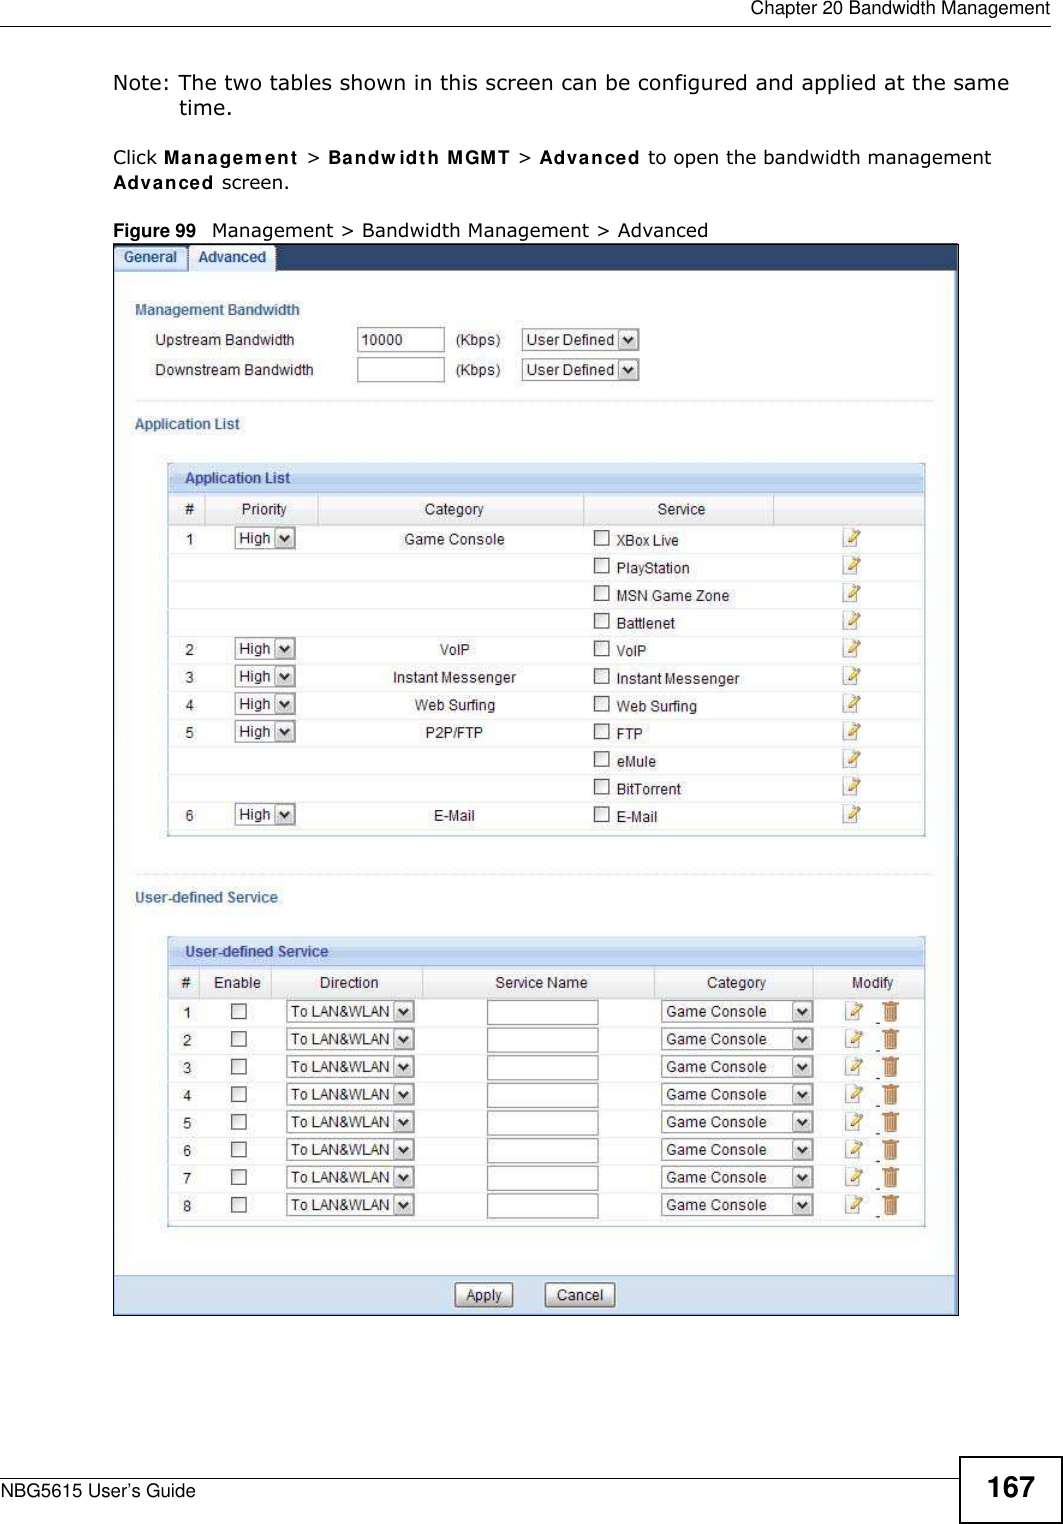  Chapter 20 Bandwidth ManagementNBG5615 User’s Guide 167Note: The two tables shown in this screen can be configured and applied at the same time. Click Managem ent &gt; Bandw idth MGMT &gt; Advanced to open the bandwidth management Advanced screen.Figure 99   Management &gt; Bandwidth Management &gt; Advanced 